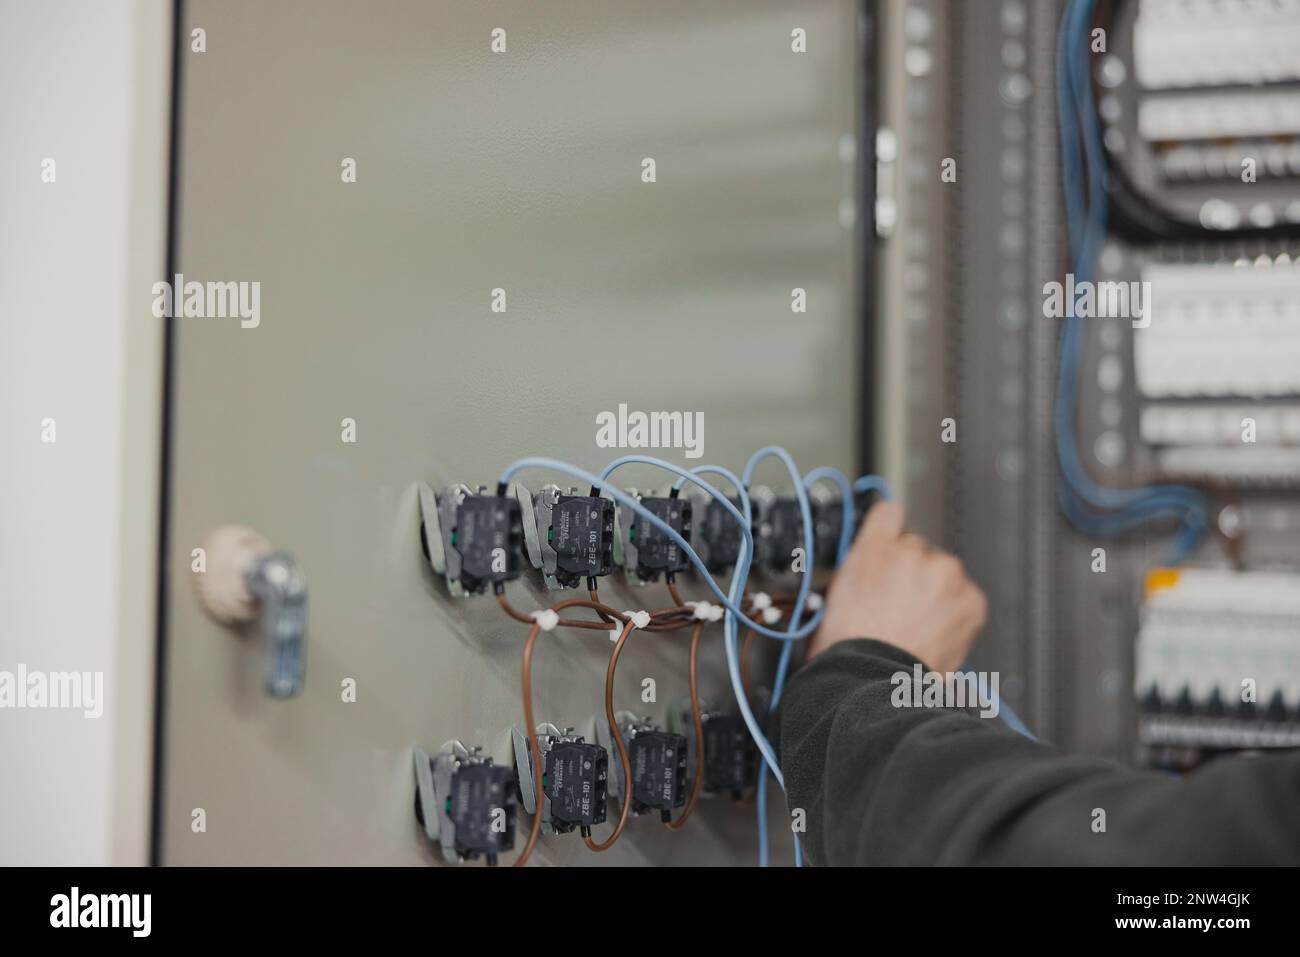 electrician working on electric panel, closeup of hands with wires Stock Photo